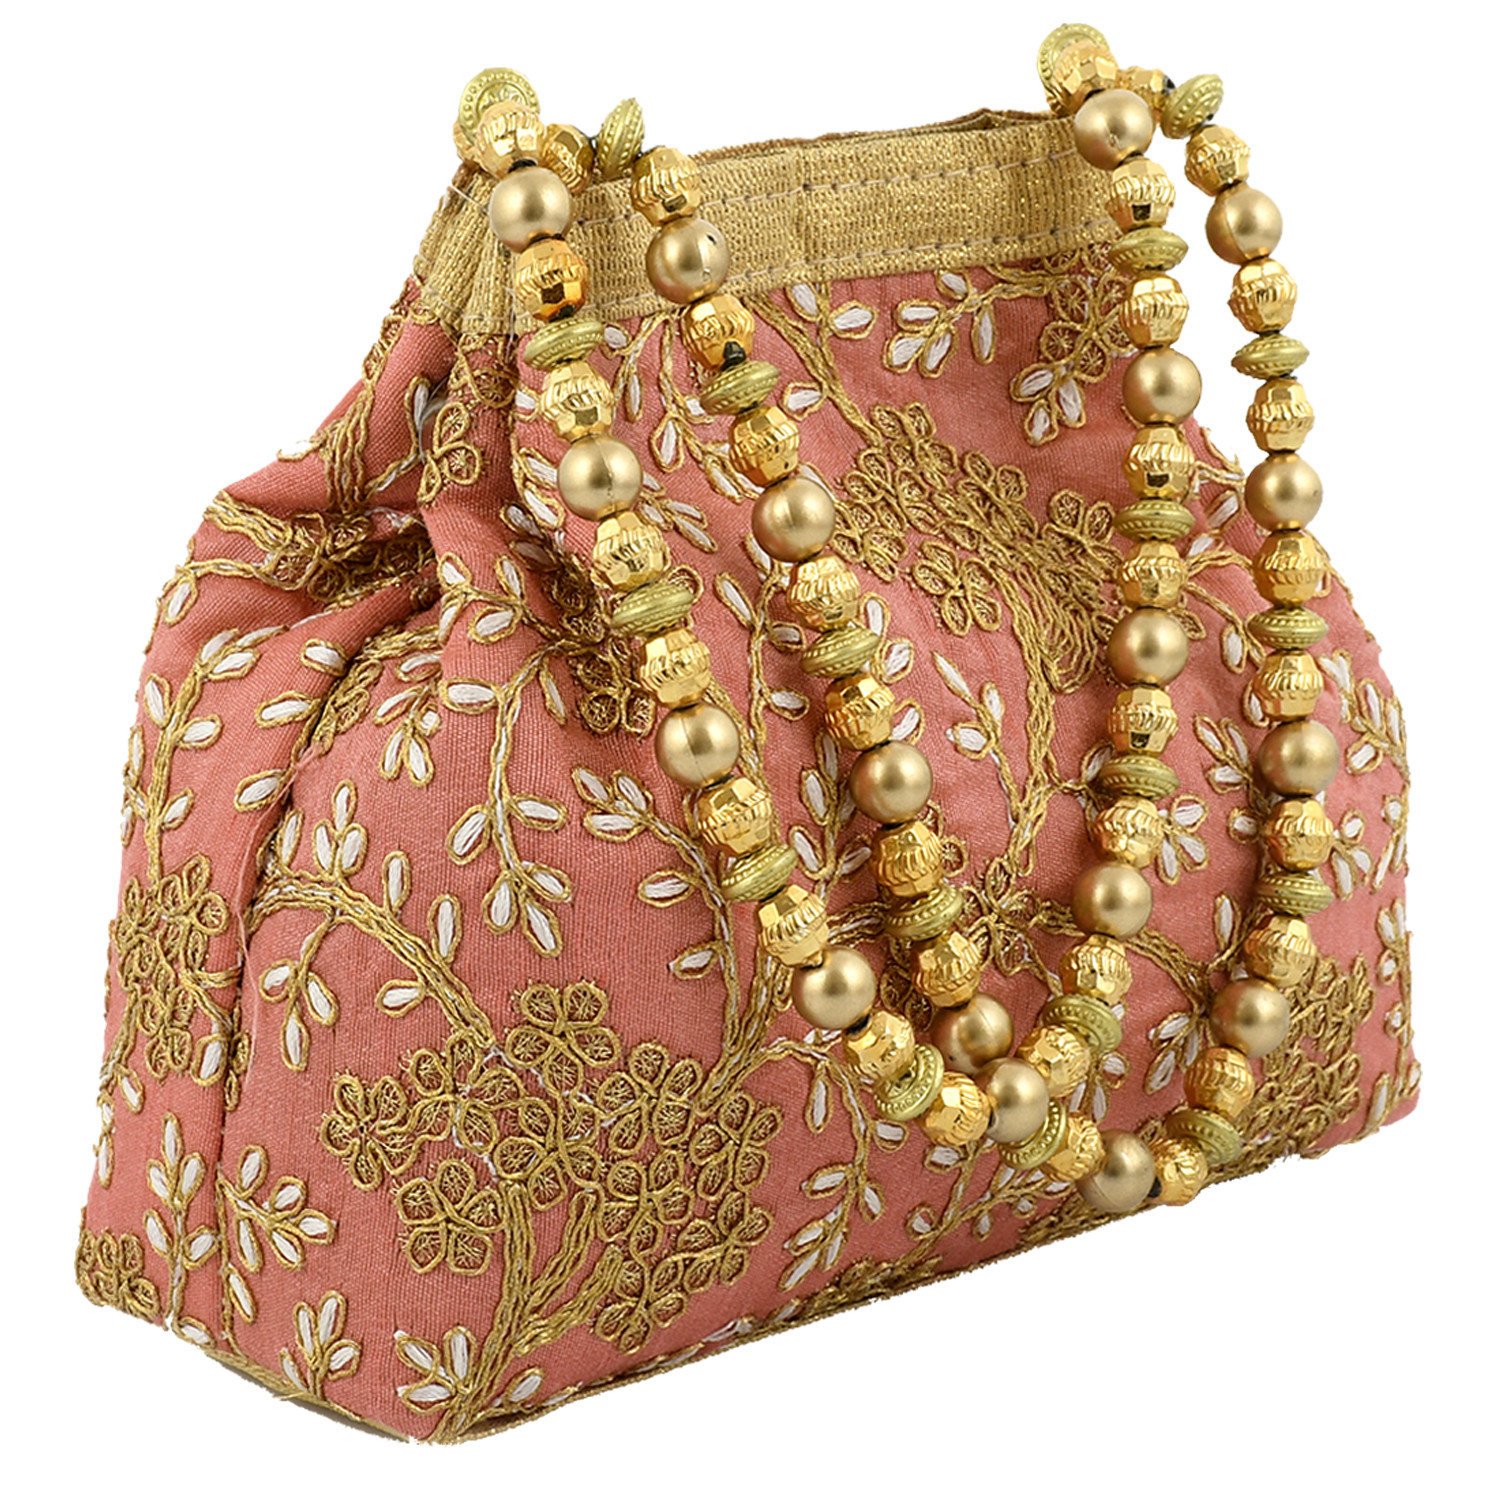 Kuber Industries Polyester 2 Pieces Embroidered Potli Batwa Pouch Bag for Women (Peach & Grey)